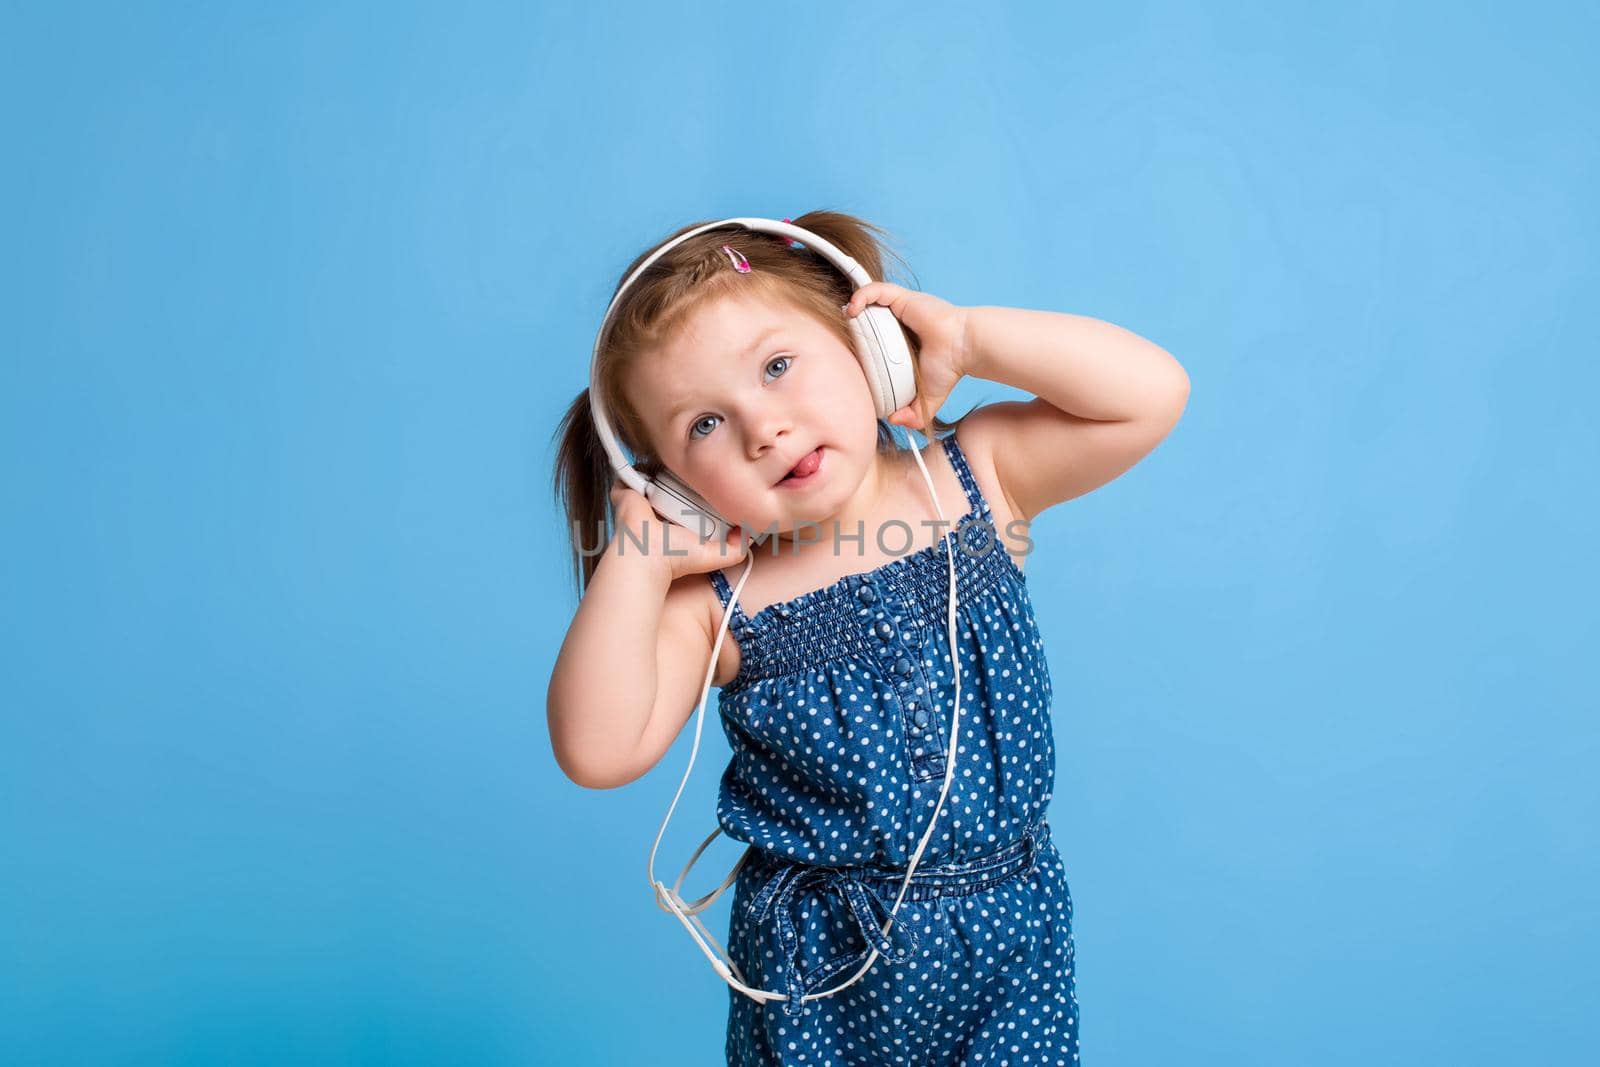 Cute little girl in headphones listening to music using a tablet and smiling on blue background. A child looks at the camera